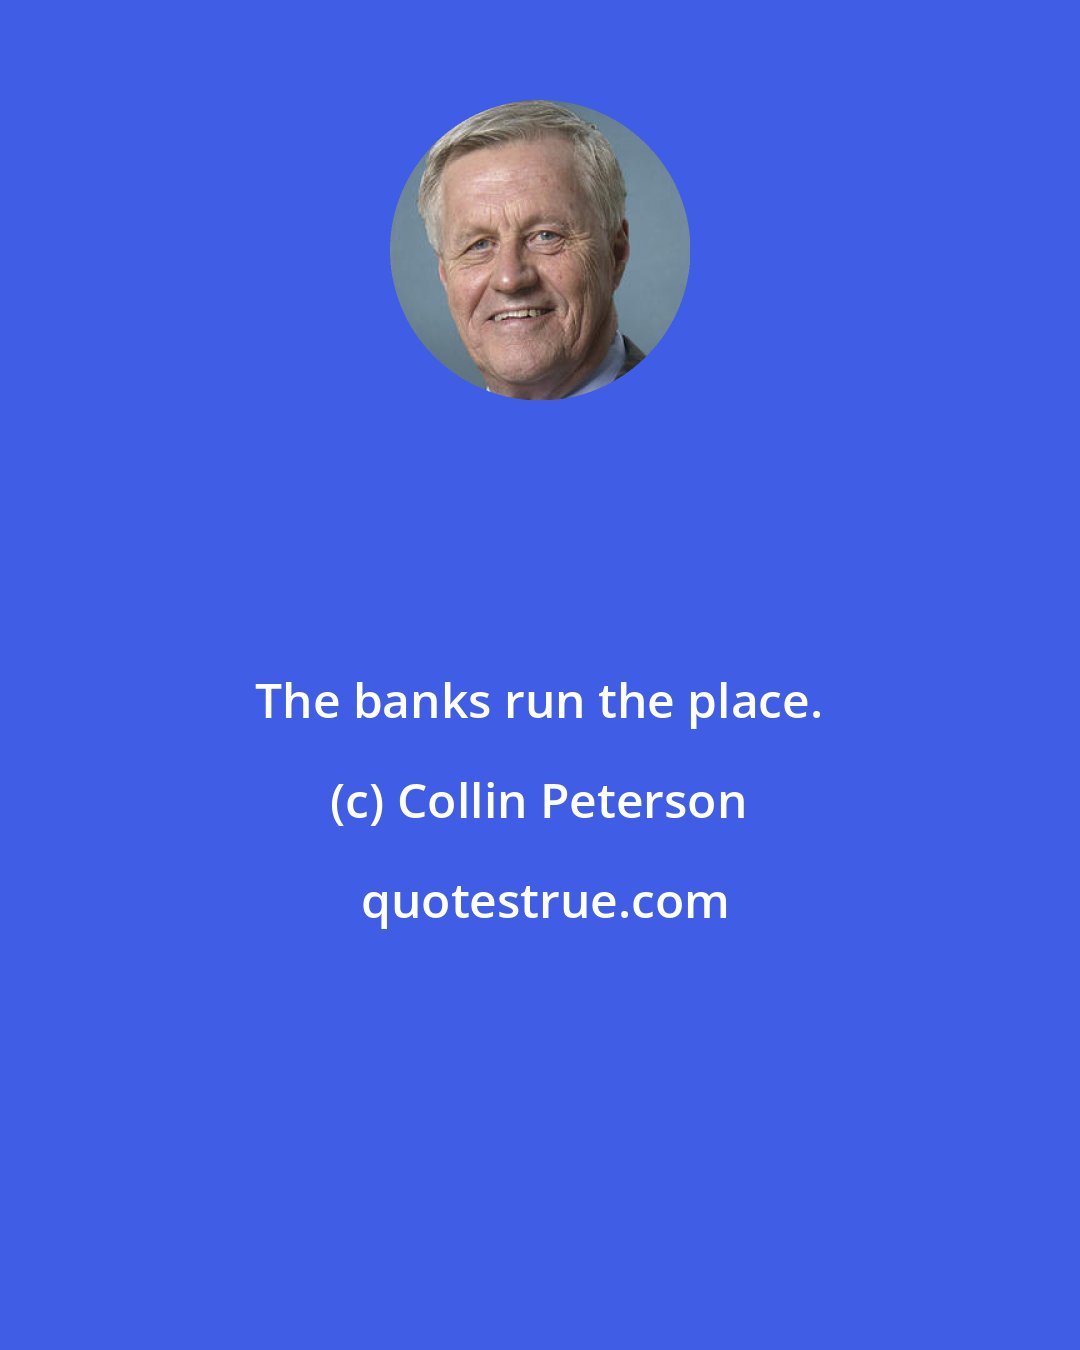 Collin Peterson: The banks run the place.